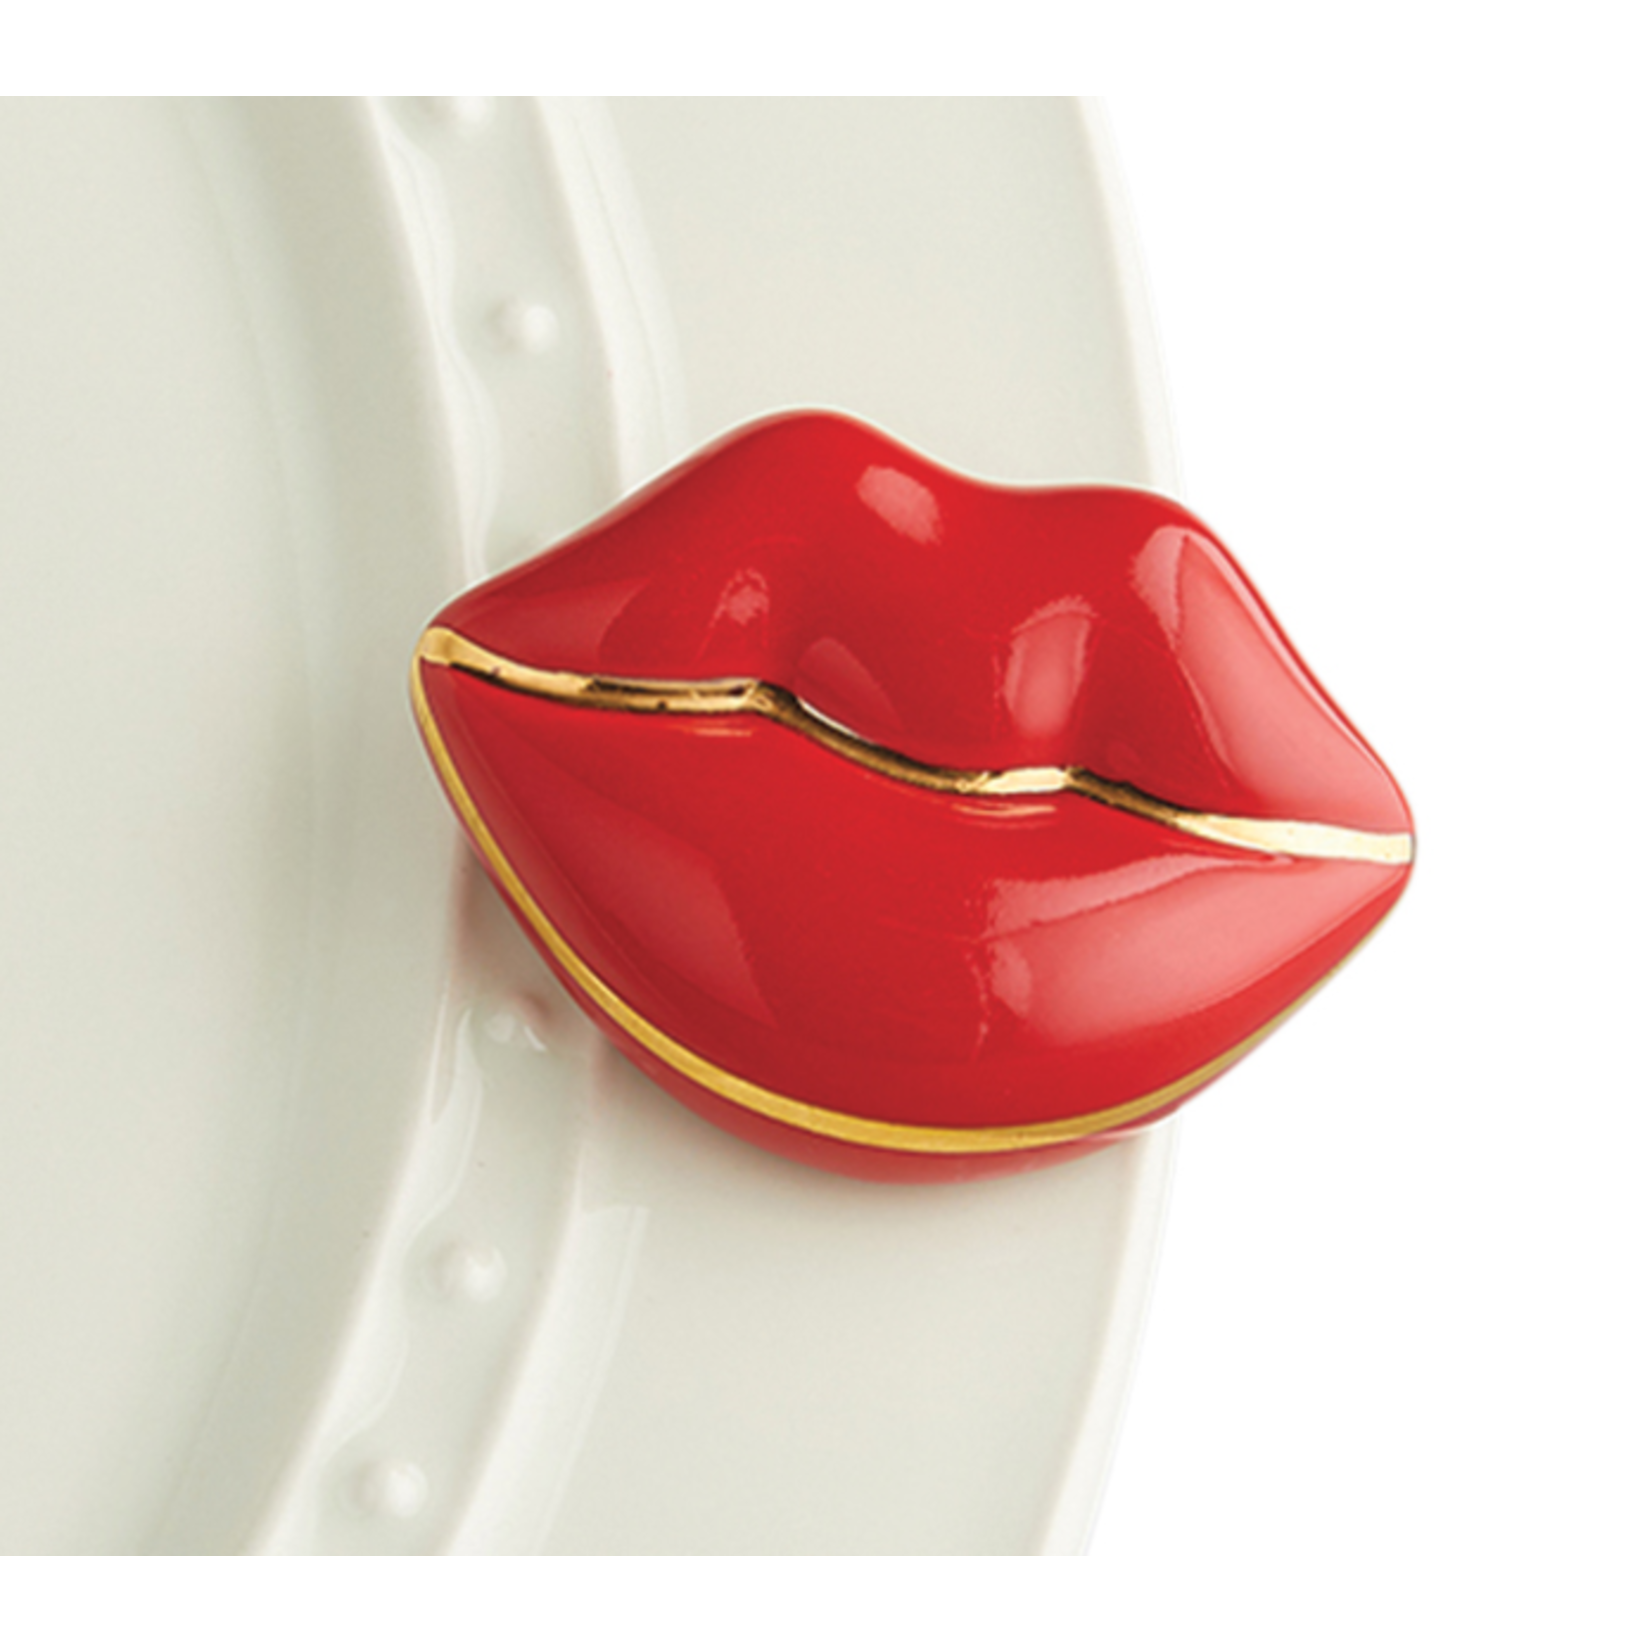 Nora Fleming Smooches! Red Lips Mini